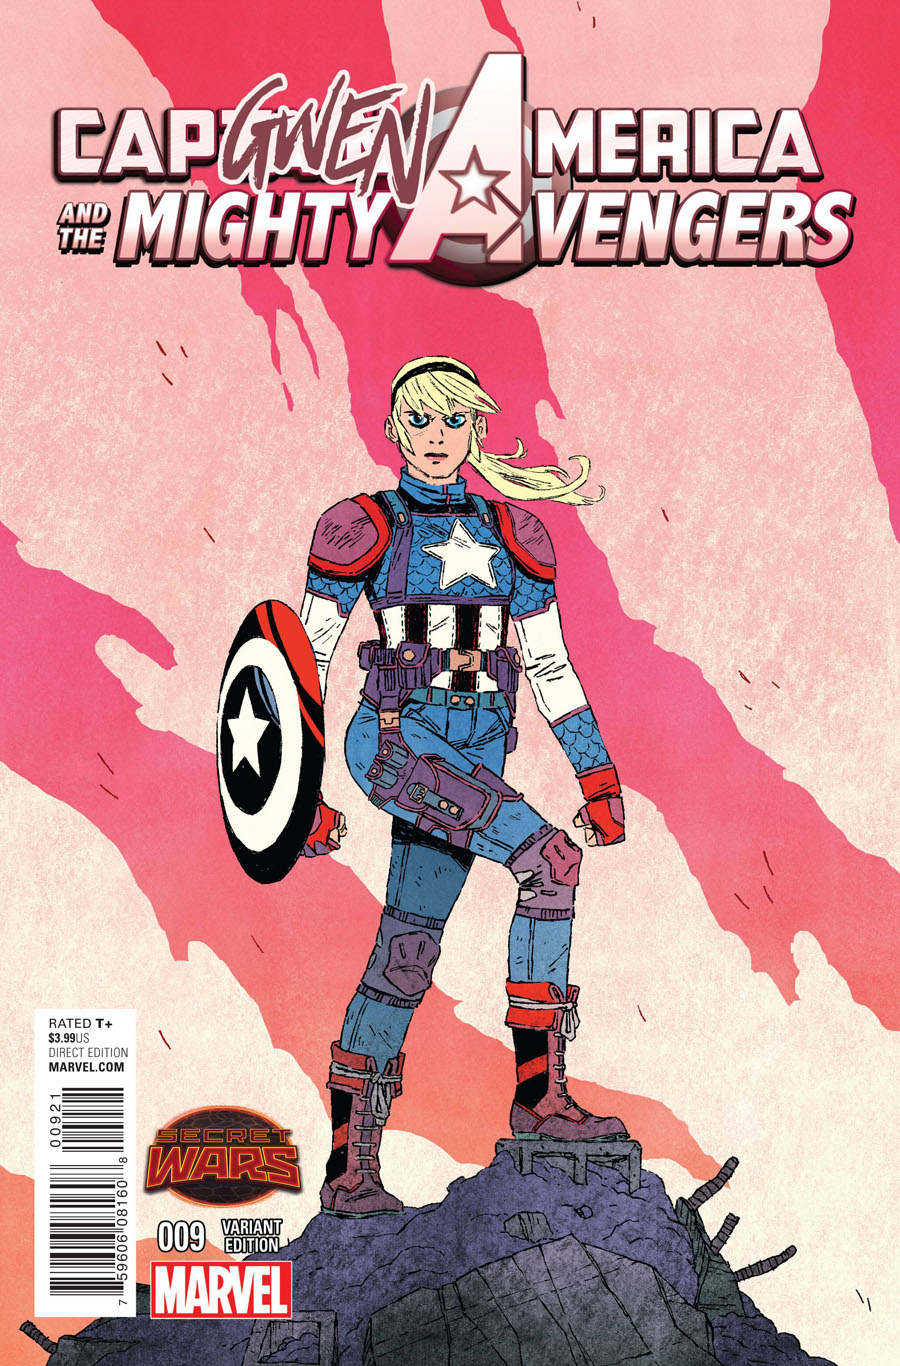 Captain America And The Mighty Avengers #9 Cover B Variant Jake Wyatt Capgwen America Cover (Secret Wars Last Days Tie-In)